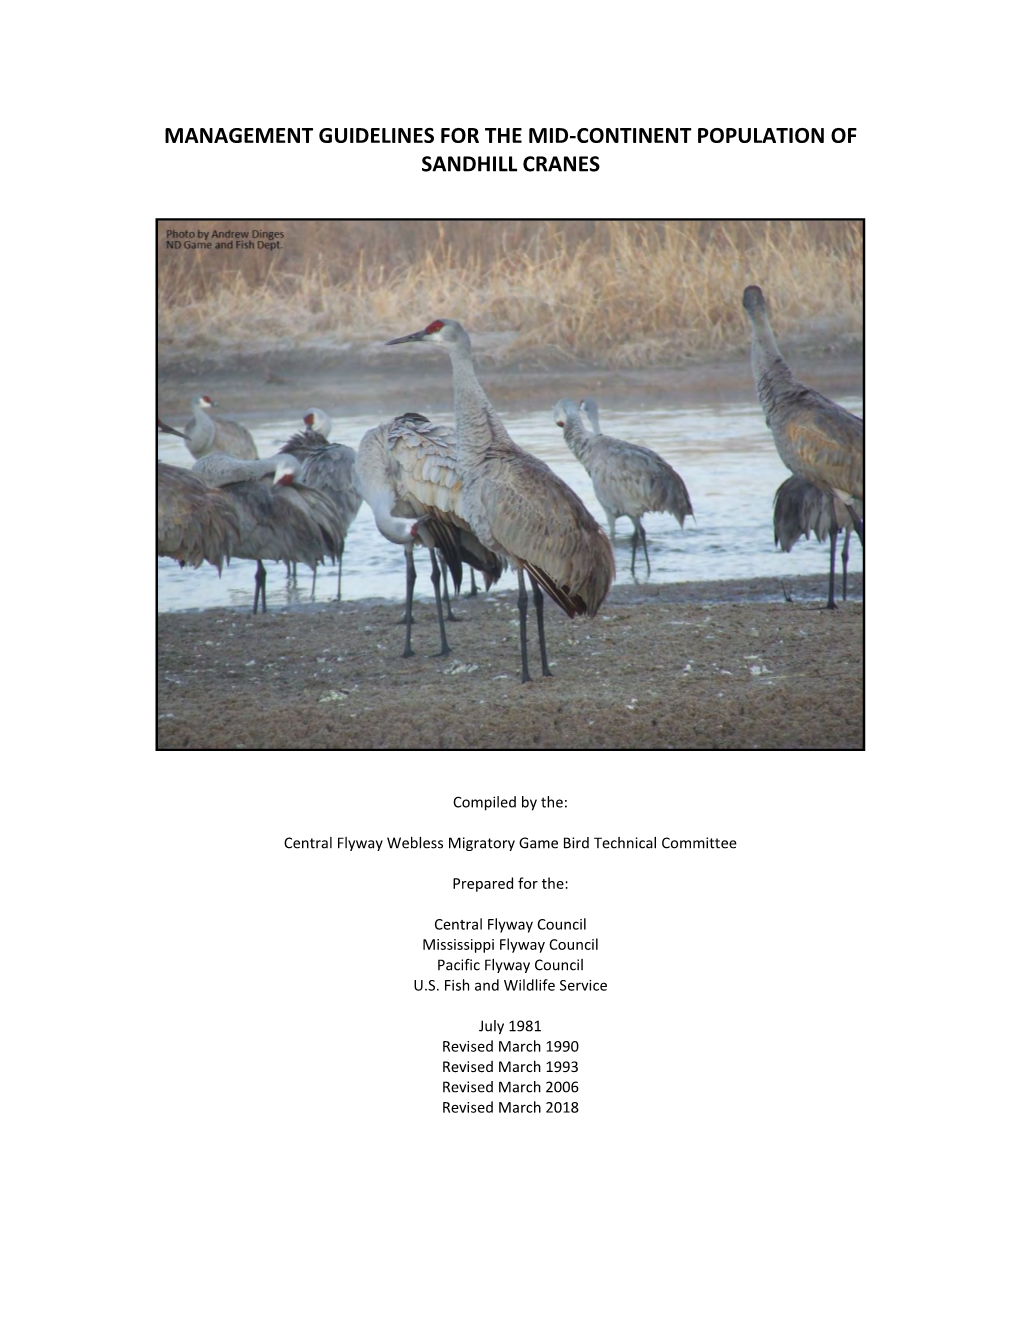 Management Guidelines for the Mid-Continent Population of Sandhill Cranes